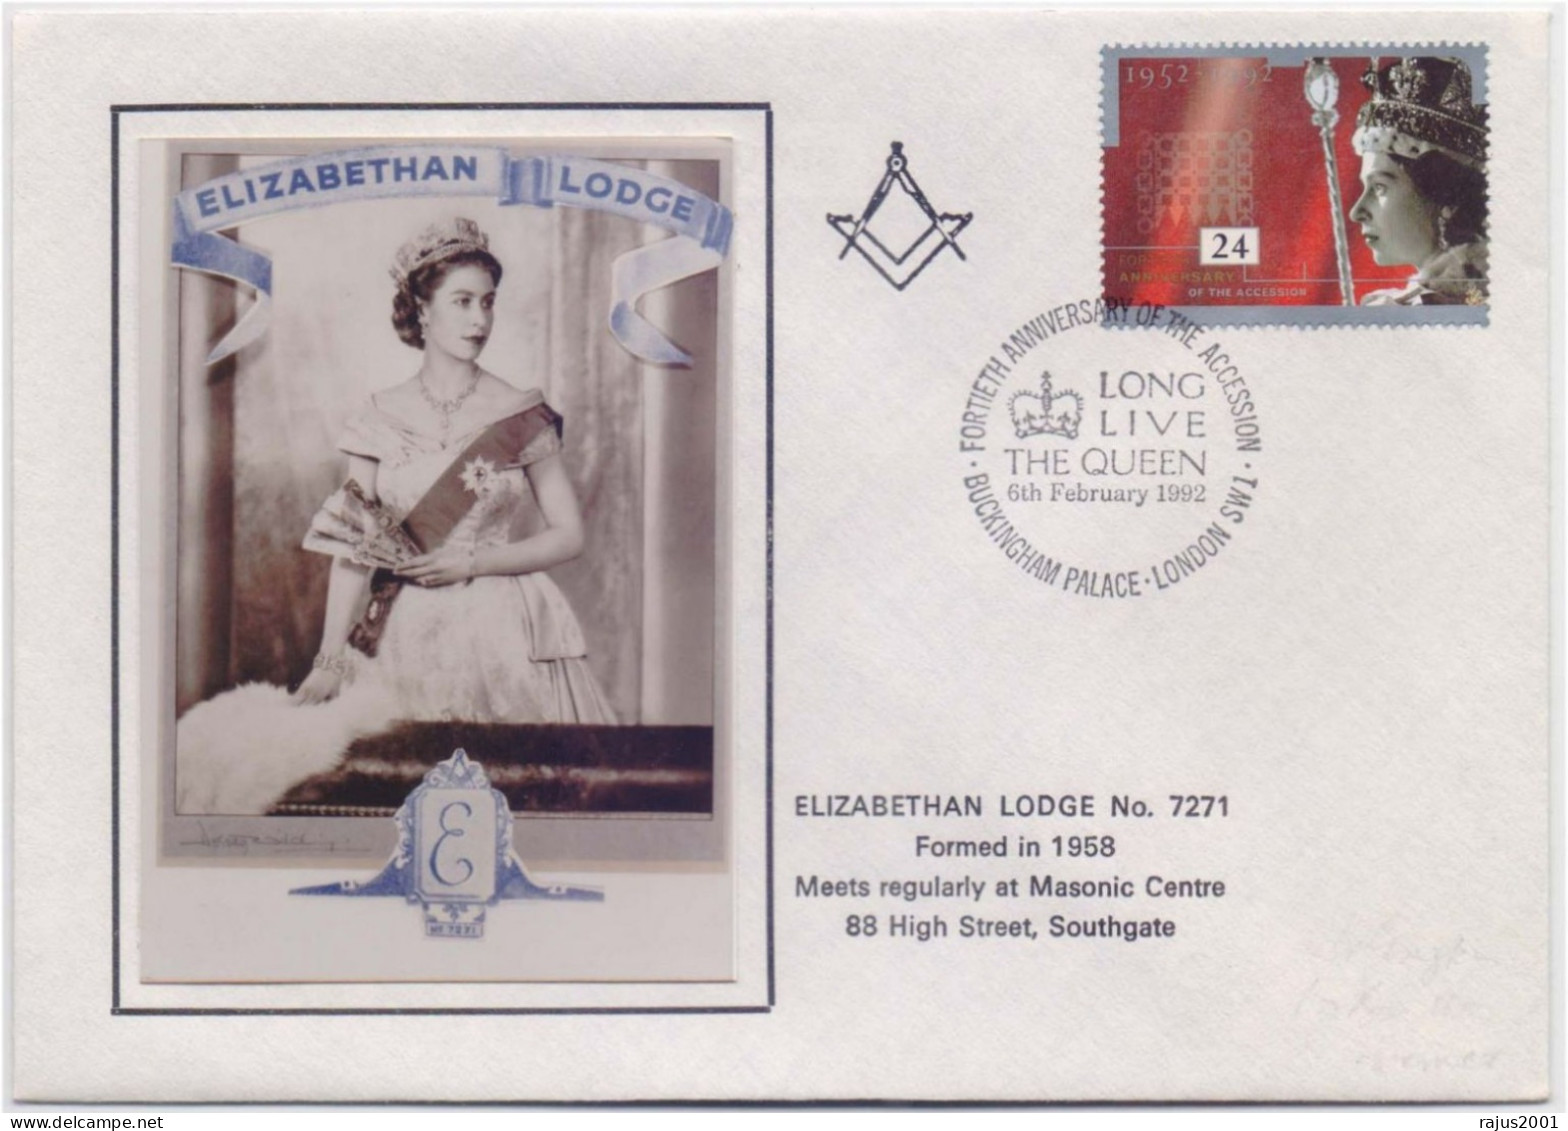 ELIZABETHAN LODGE NO 7271 FORMED IN 1958, Queen Elizabeth, Freemasonry, Masonic Limited Only 100 Cover Issued Cover - Vrijmetselarij